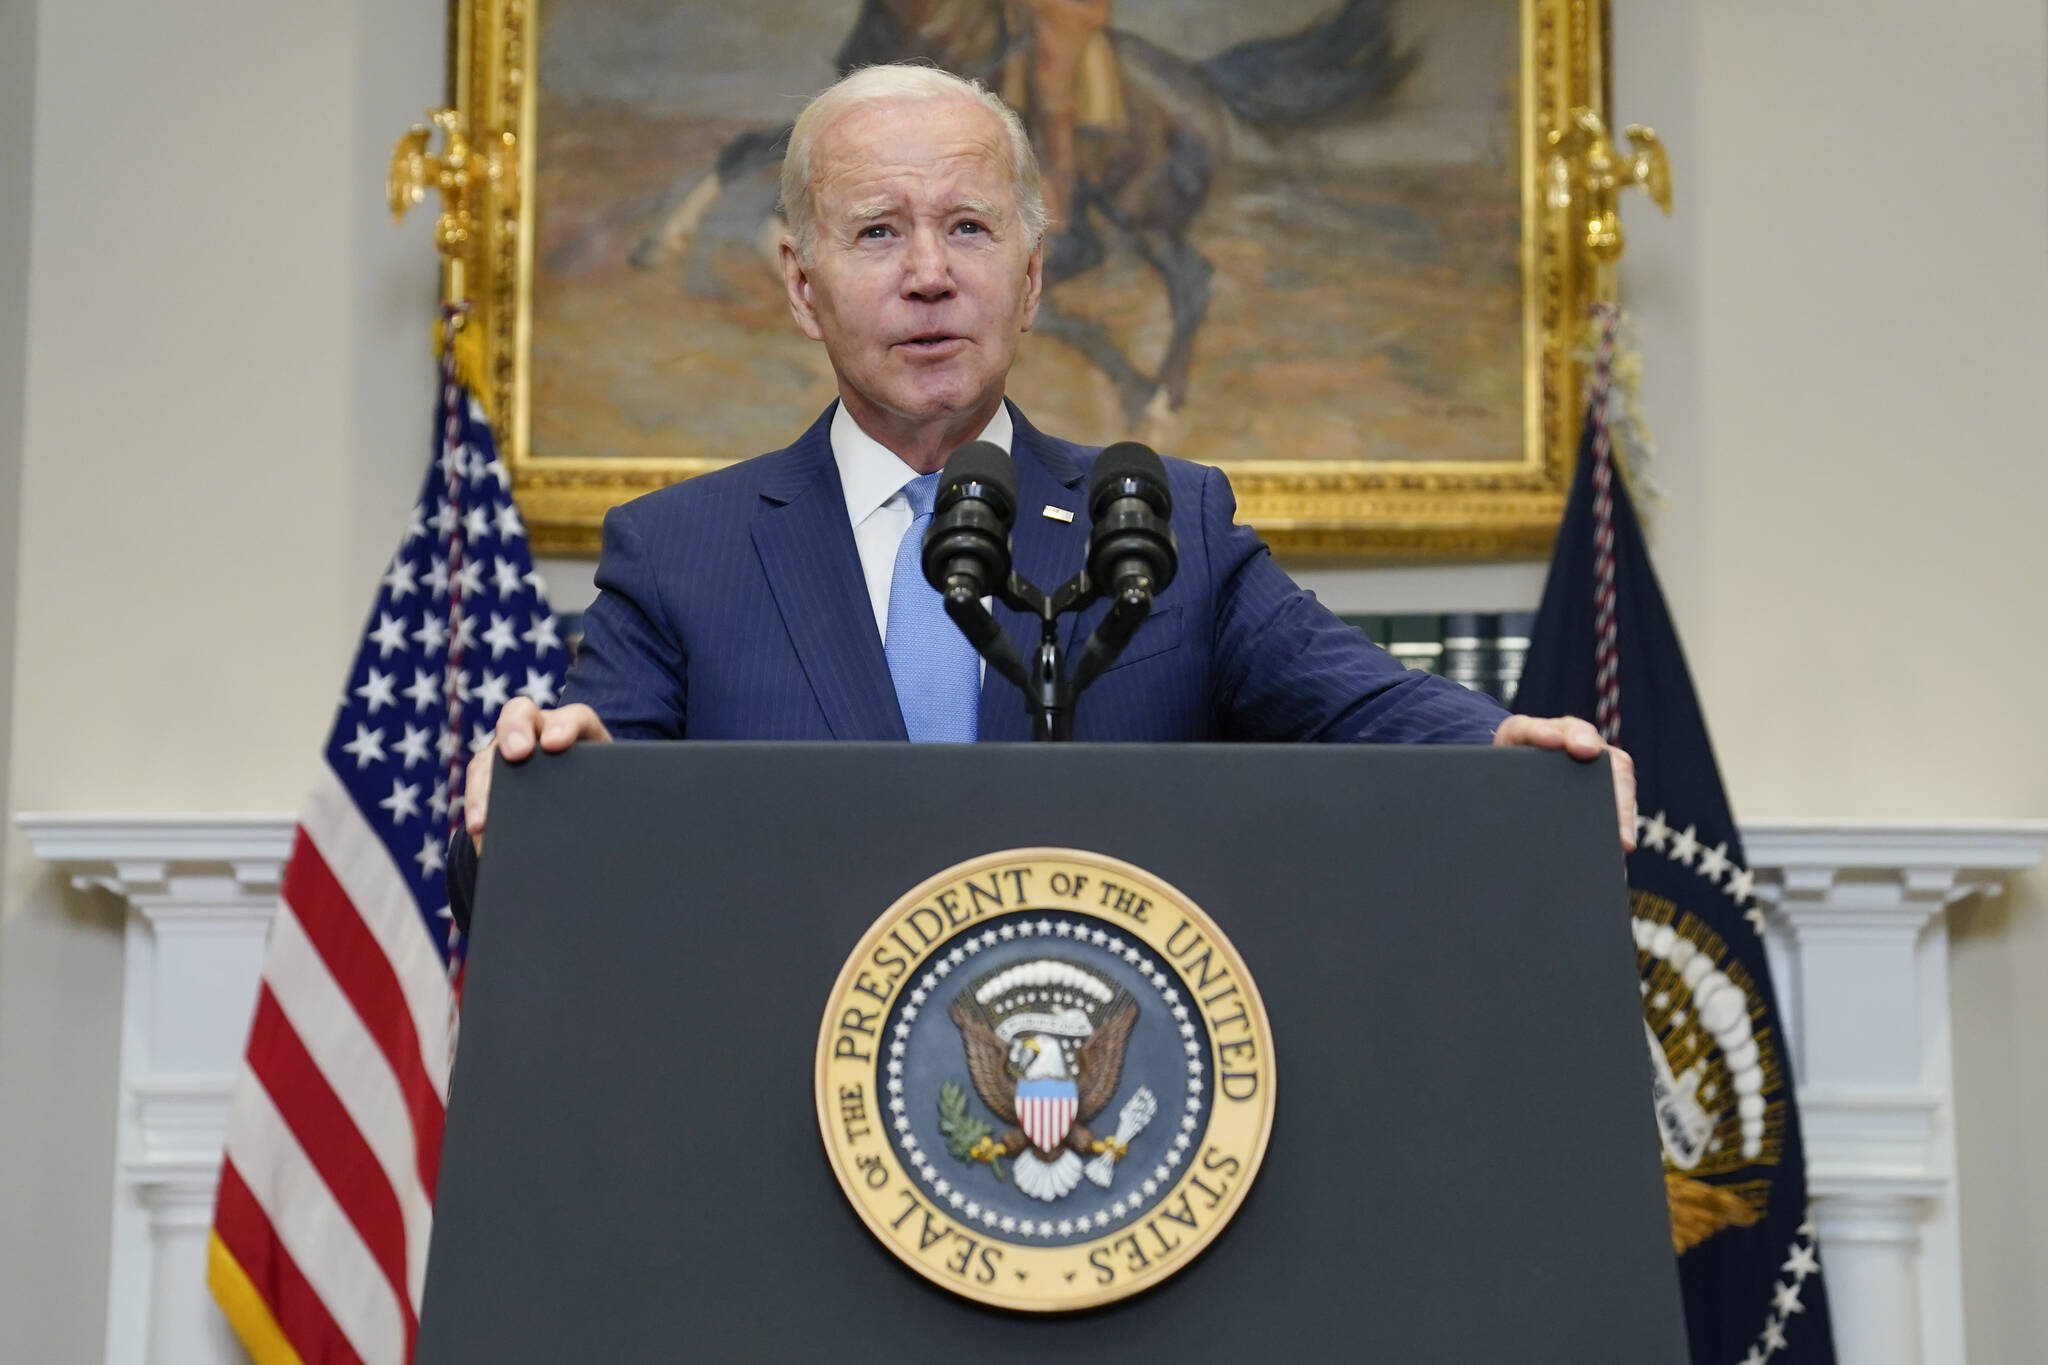 President Joe Biden speaks about the debt limit talks in the Roosevelt Room of the White House, Wednesday, May 17, 2023, in Washington. (AP Photo / Evan Vucci)